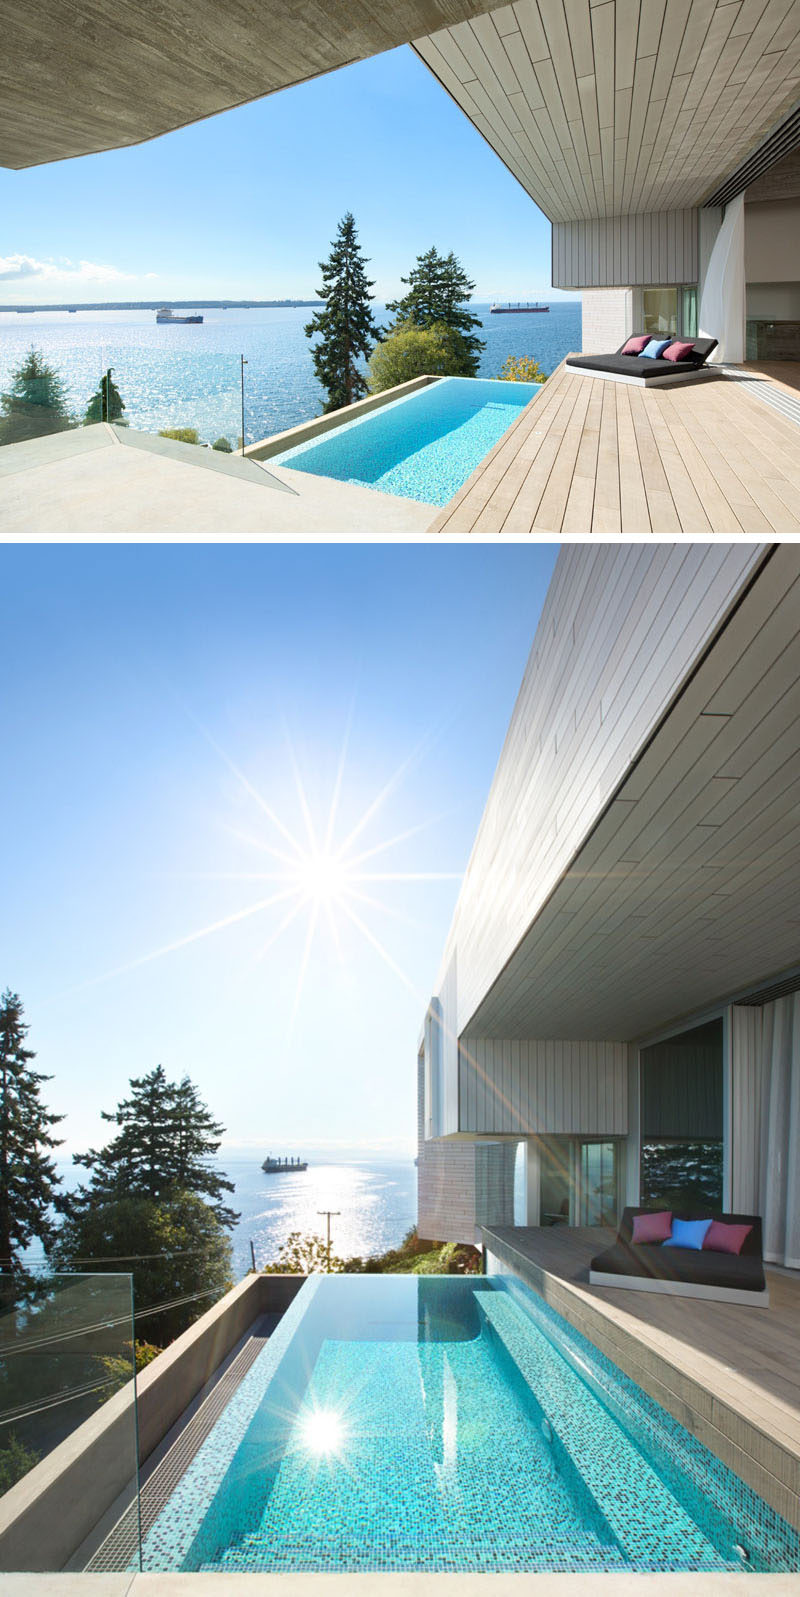 A concrete platform off the wooden deck of this modern house, guides you down to the small swimming pool (plunge pool), that is perfect for enjoying the ocean views.